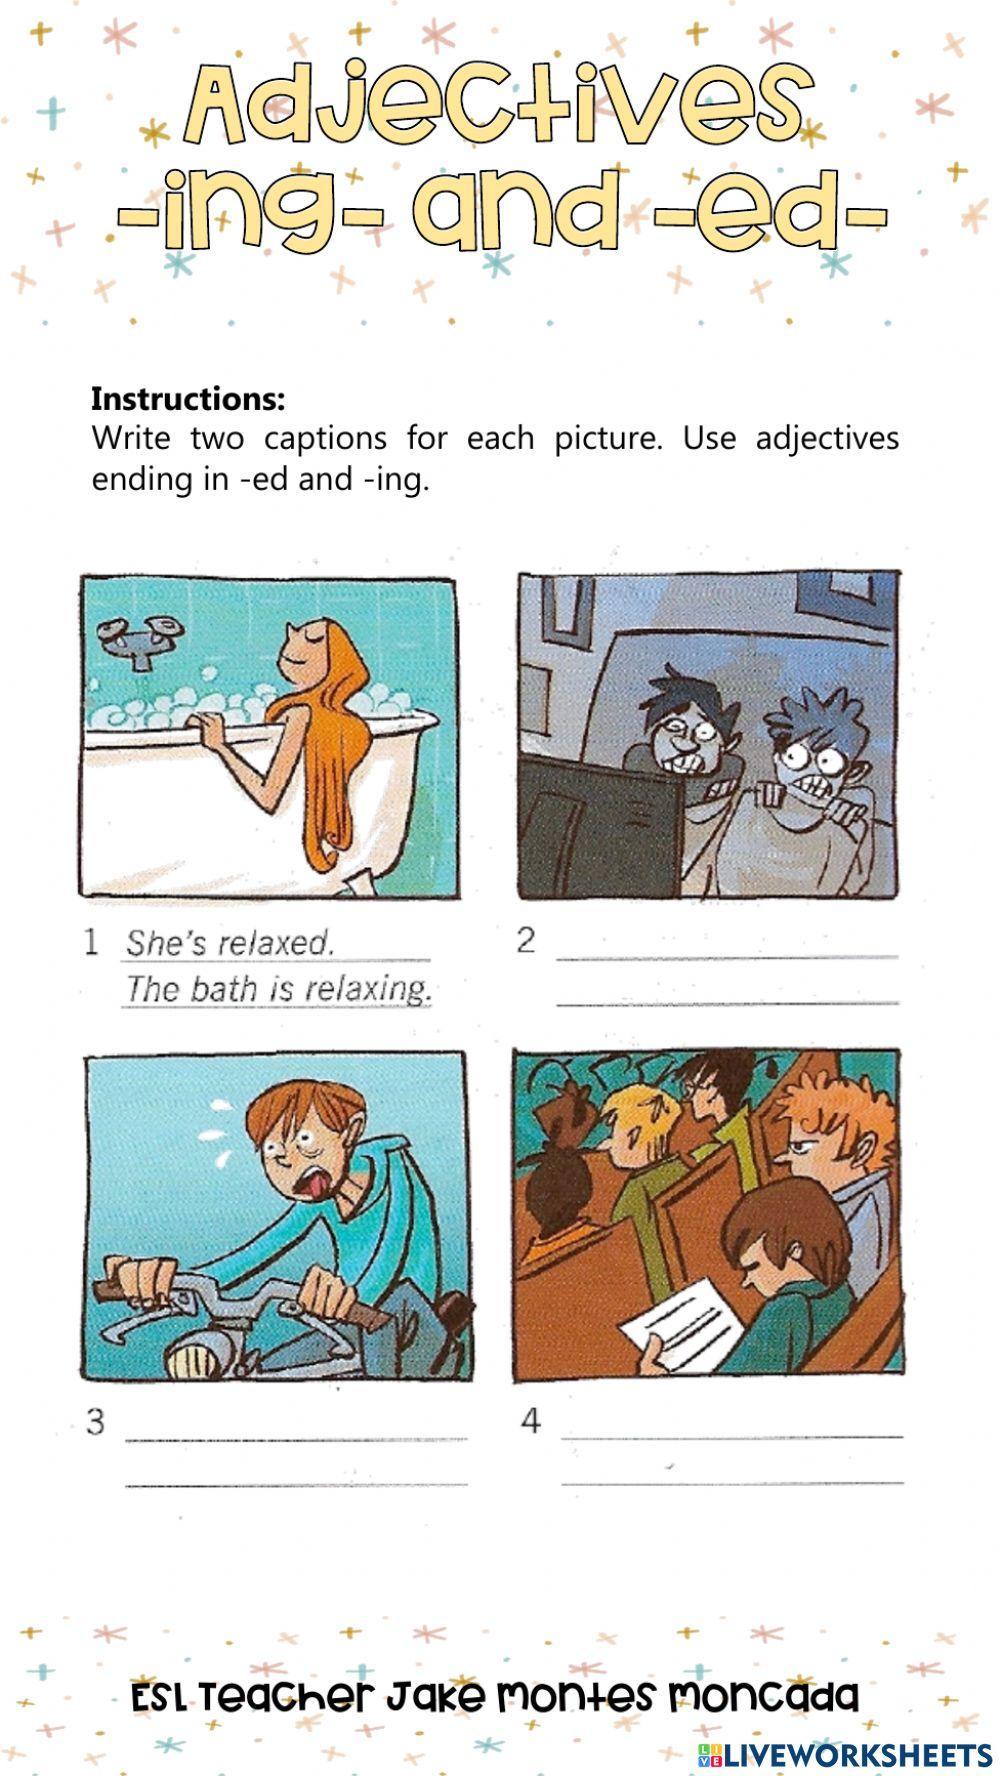 Ed and ing adjectives